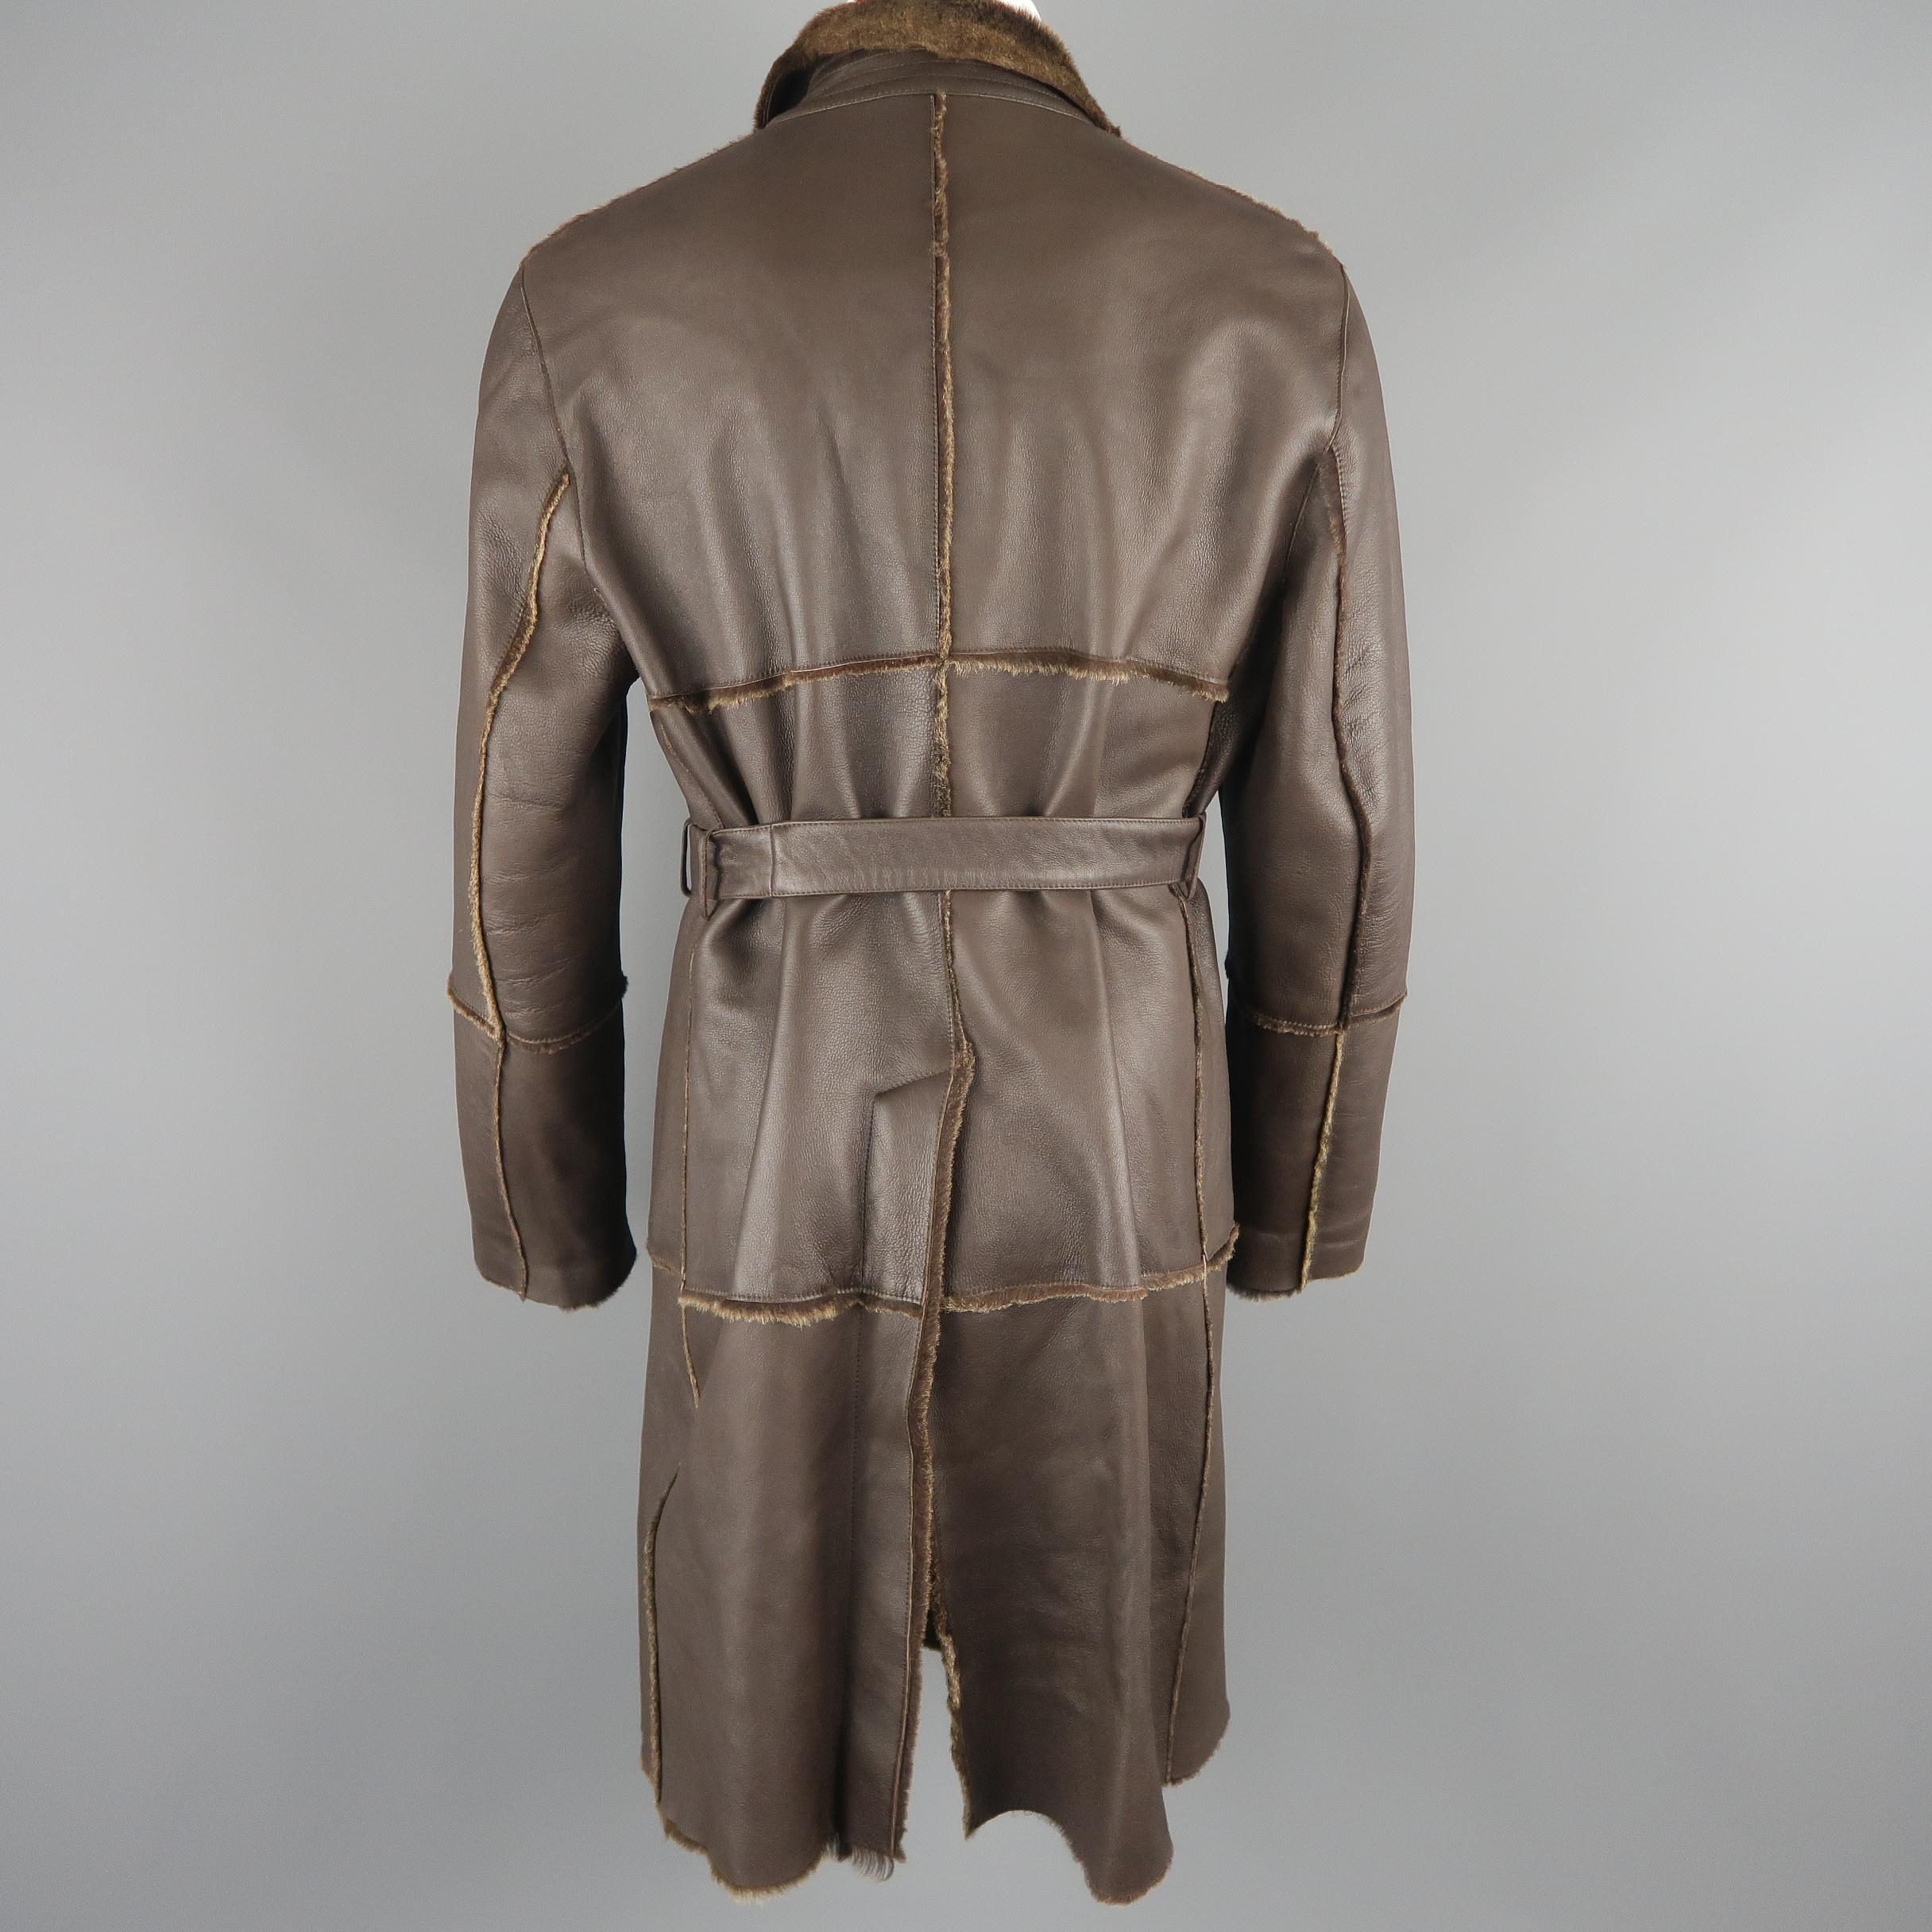 Burberry London Brown Trimmed Sheep Skin Fur Shearling Trench Coat 6